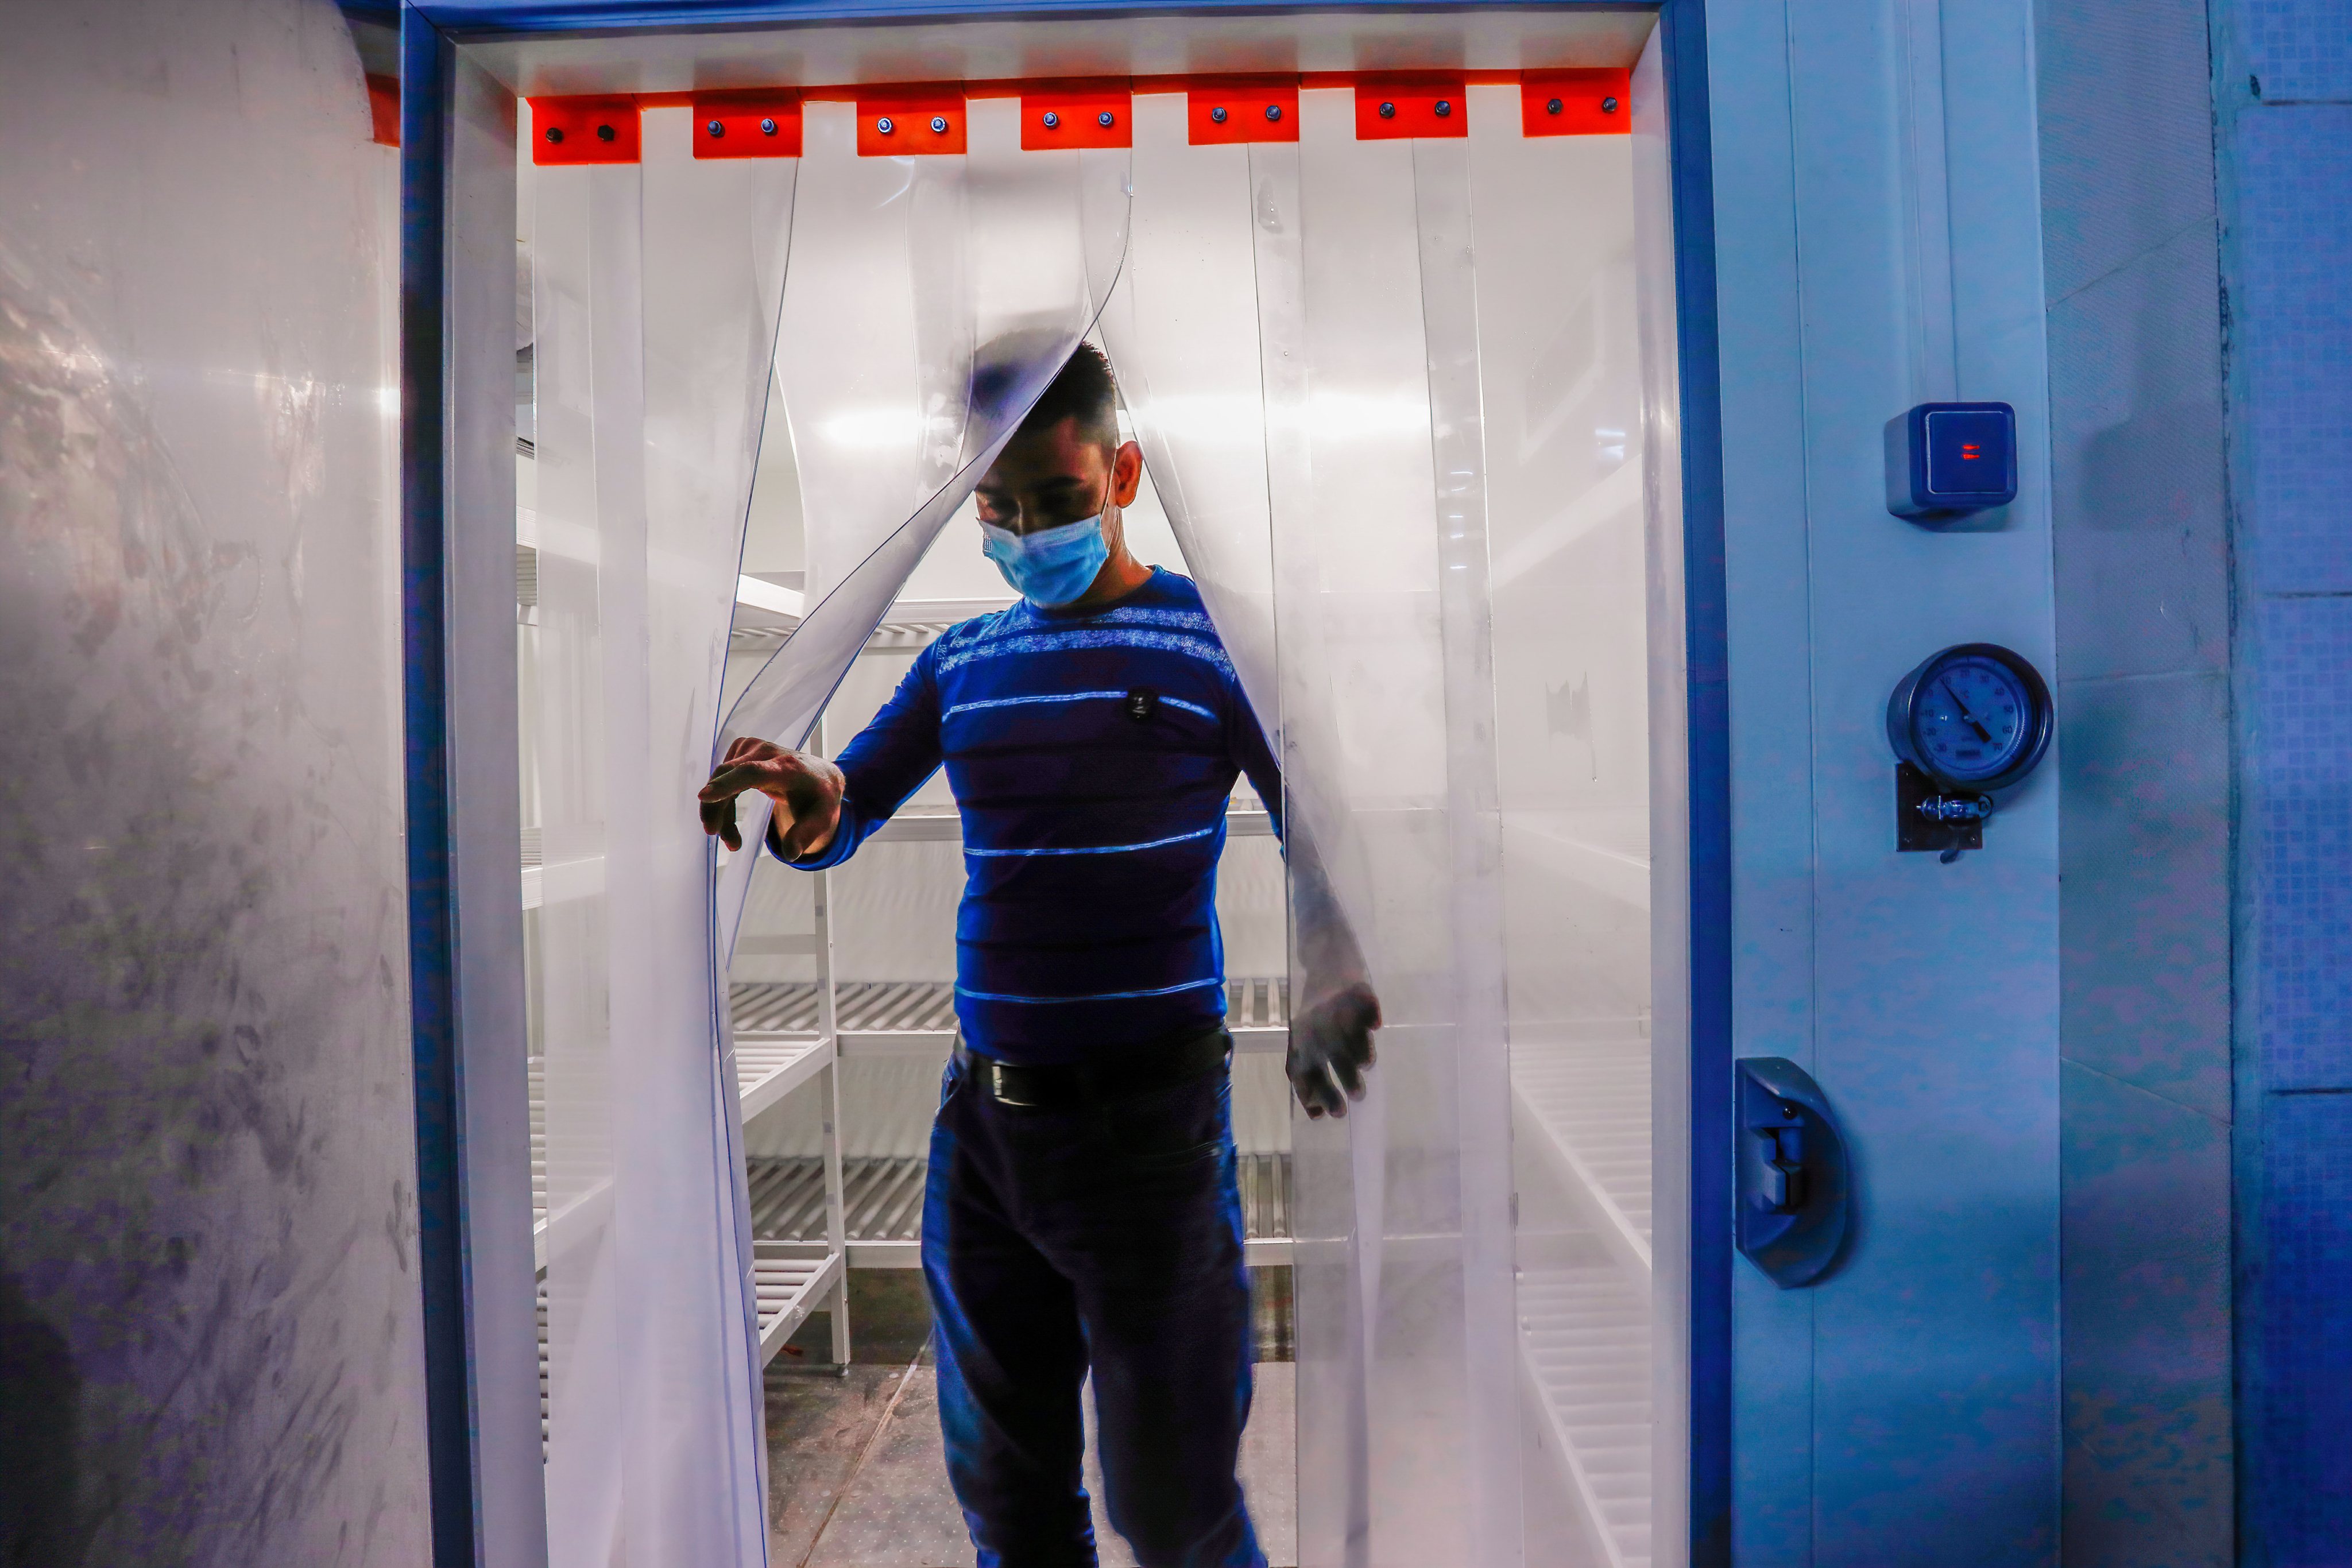 A technician seen exiting a cold storage room which is being